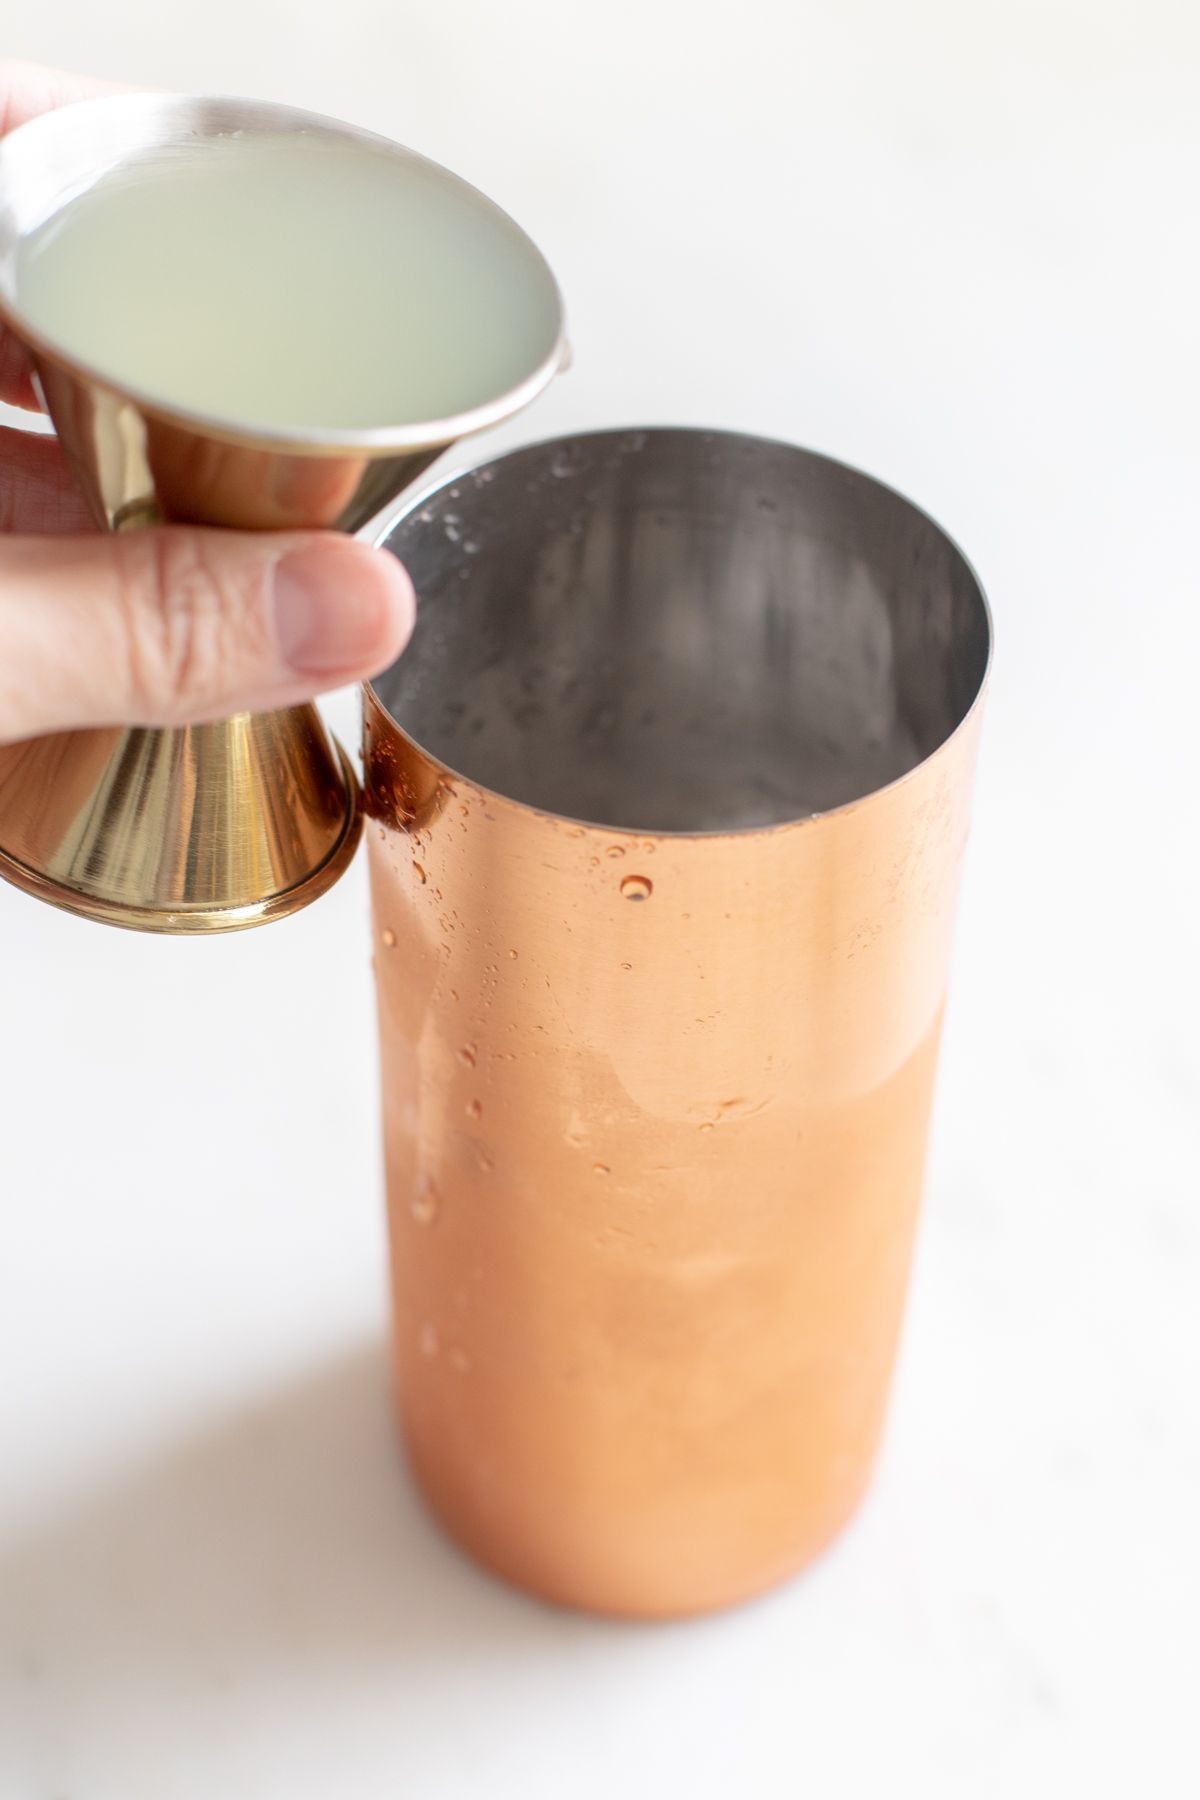 A copper shaker with a hand mixing up Cadillac margarita ingredients.